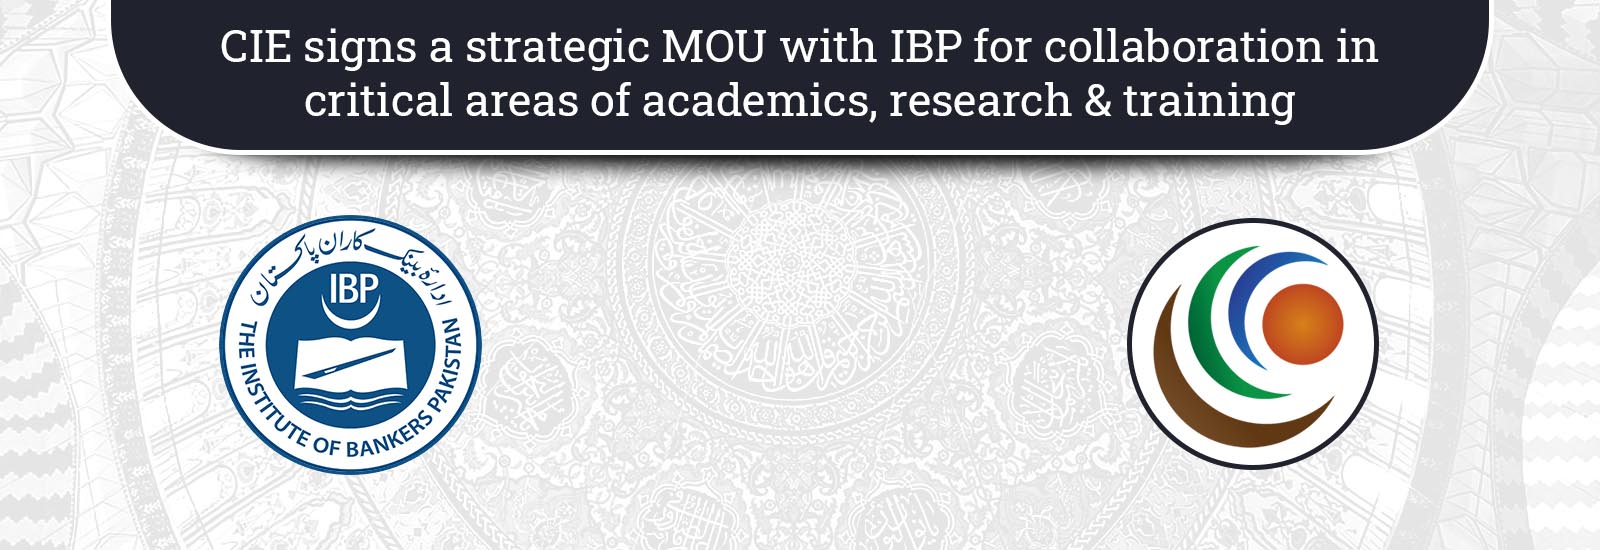 CIE signs a strategic MOU with IBP for collaboration